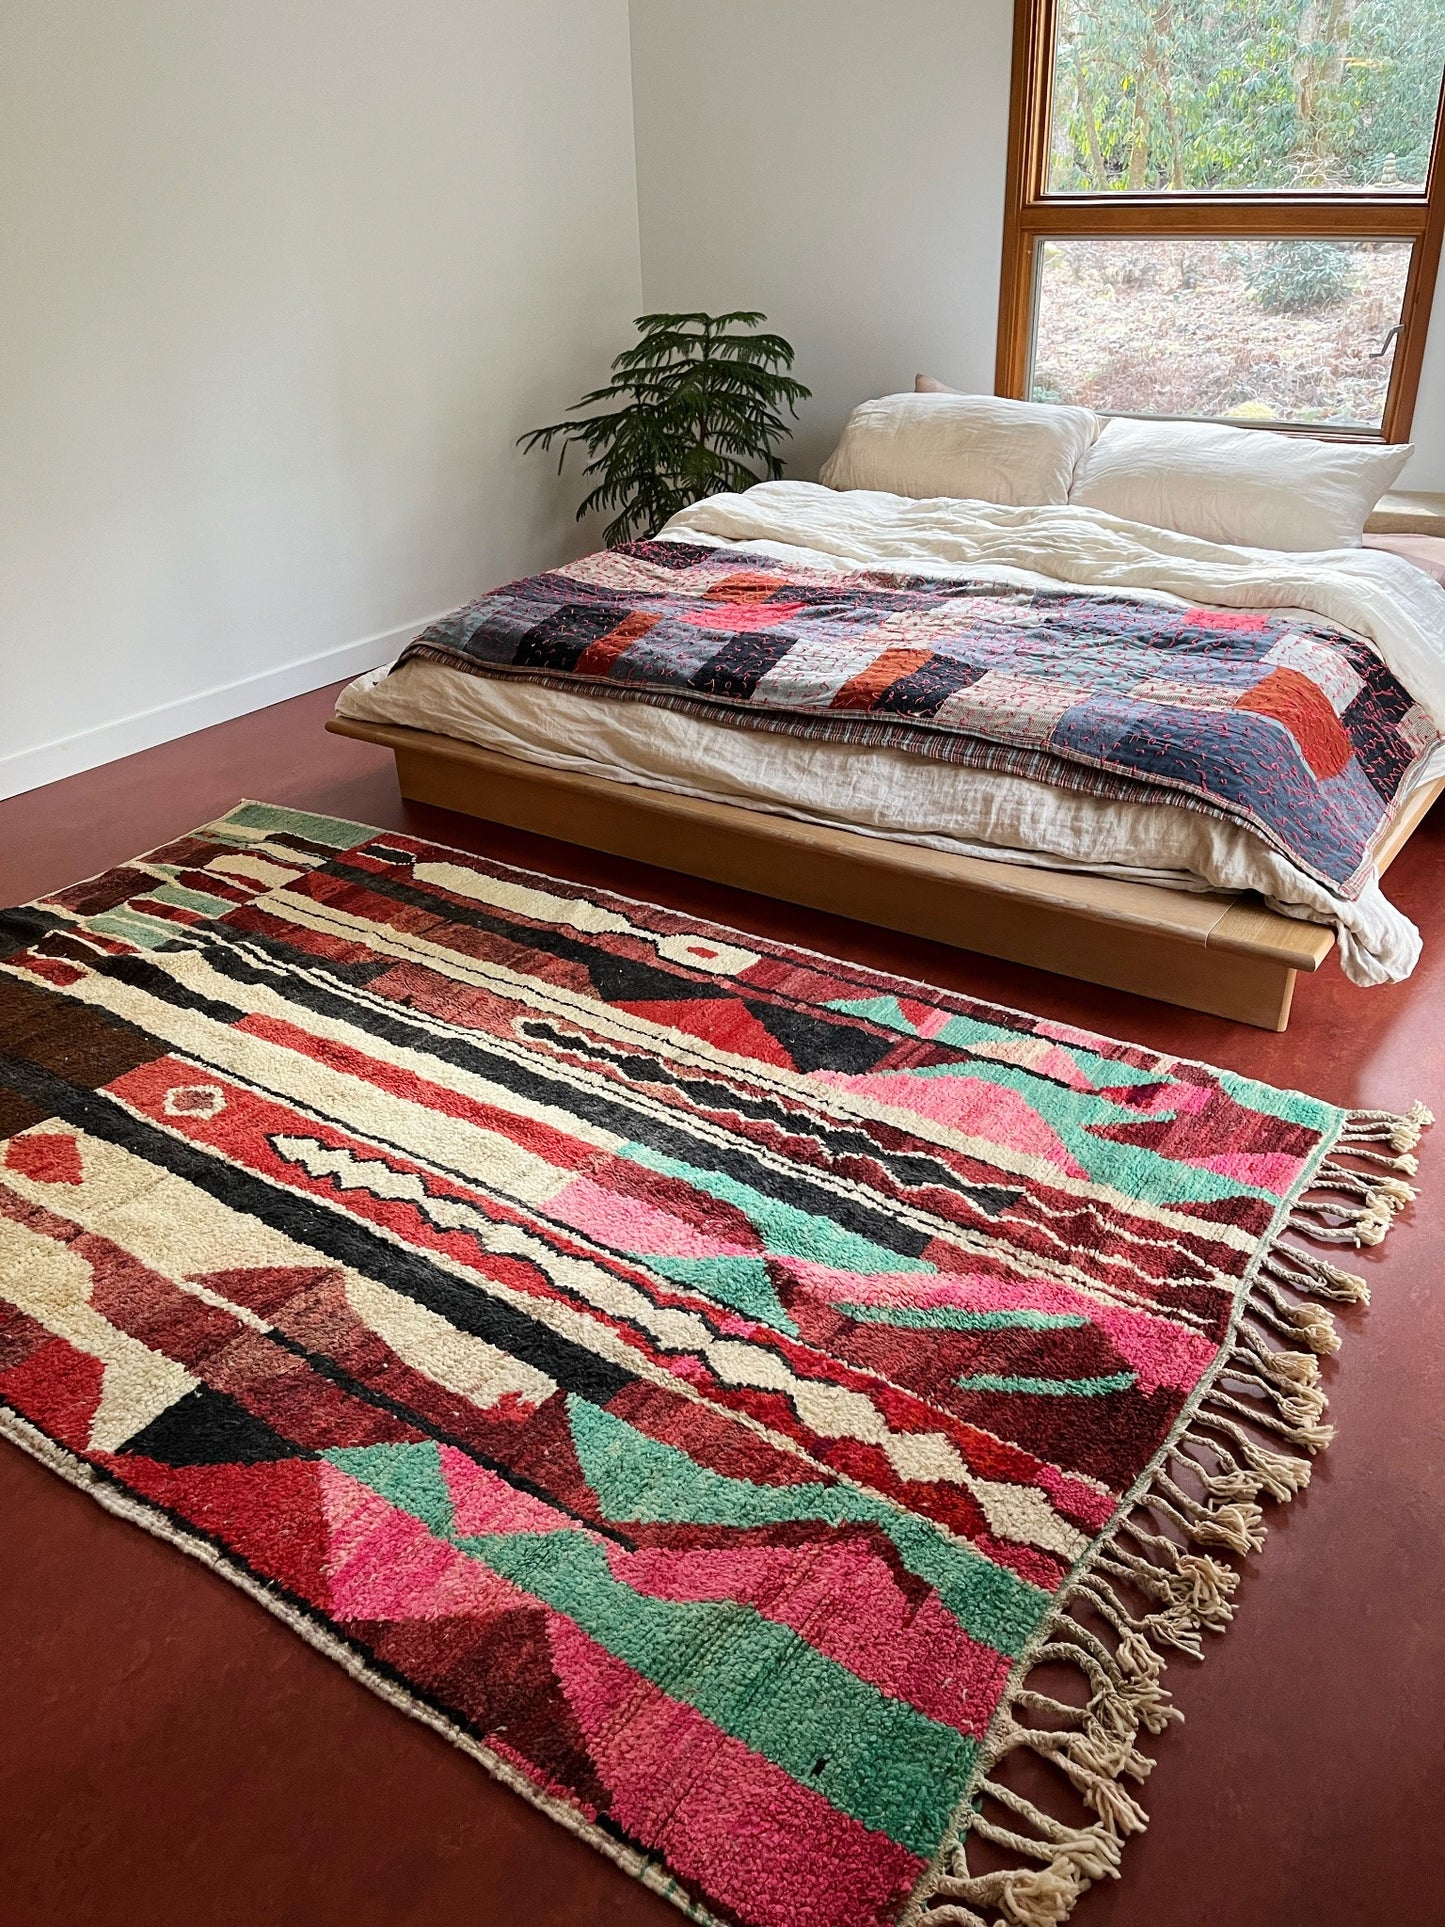 Style Ponderosa Moroccan Rug with a King Size Bed